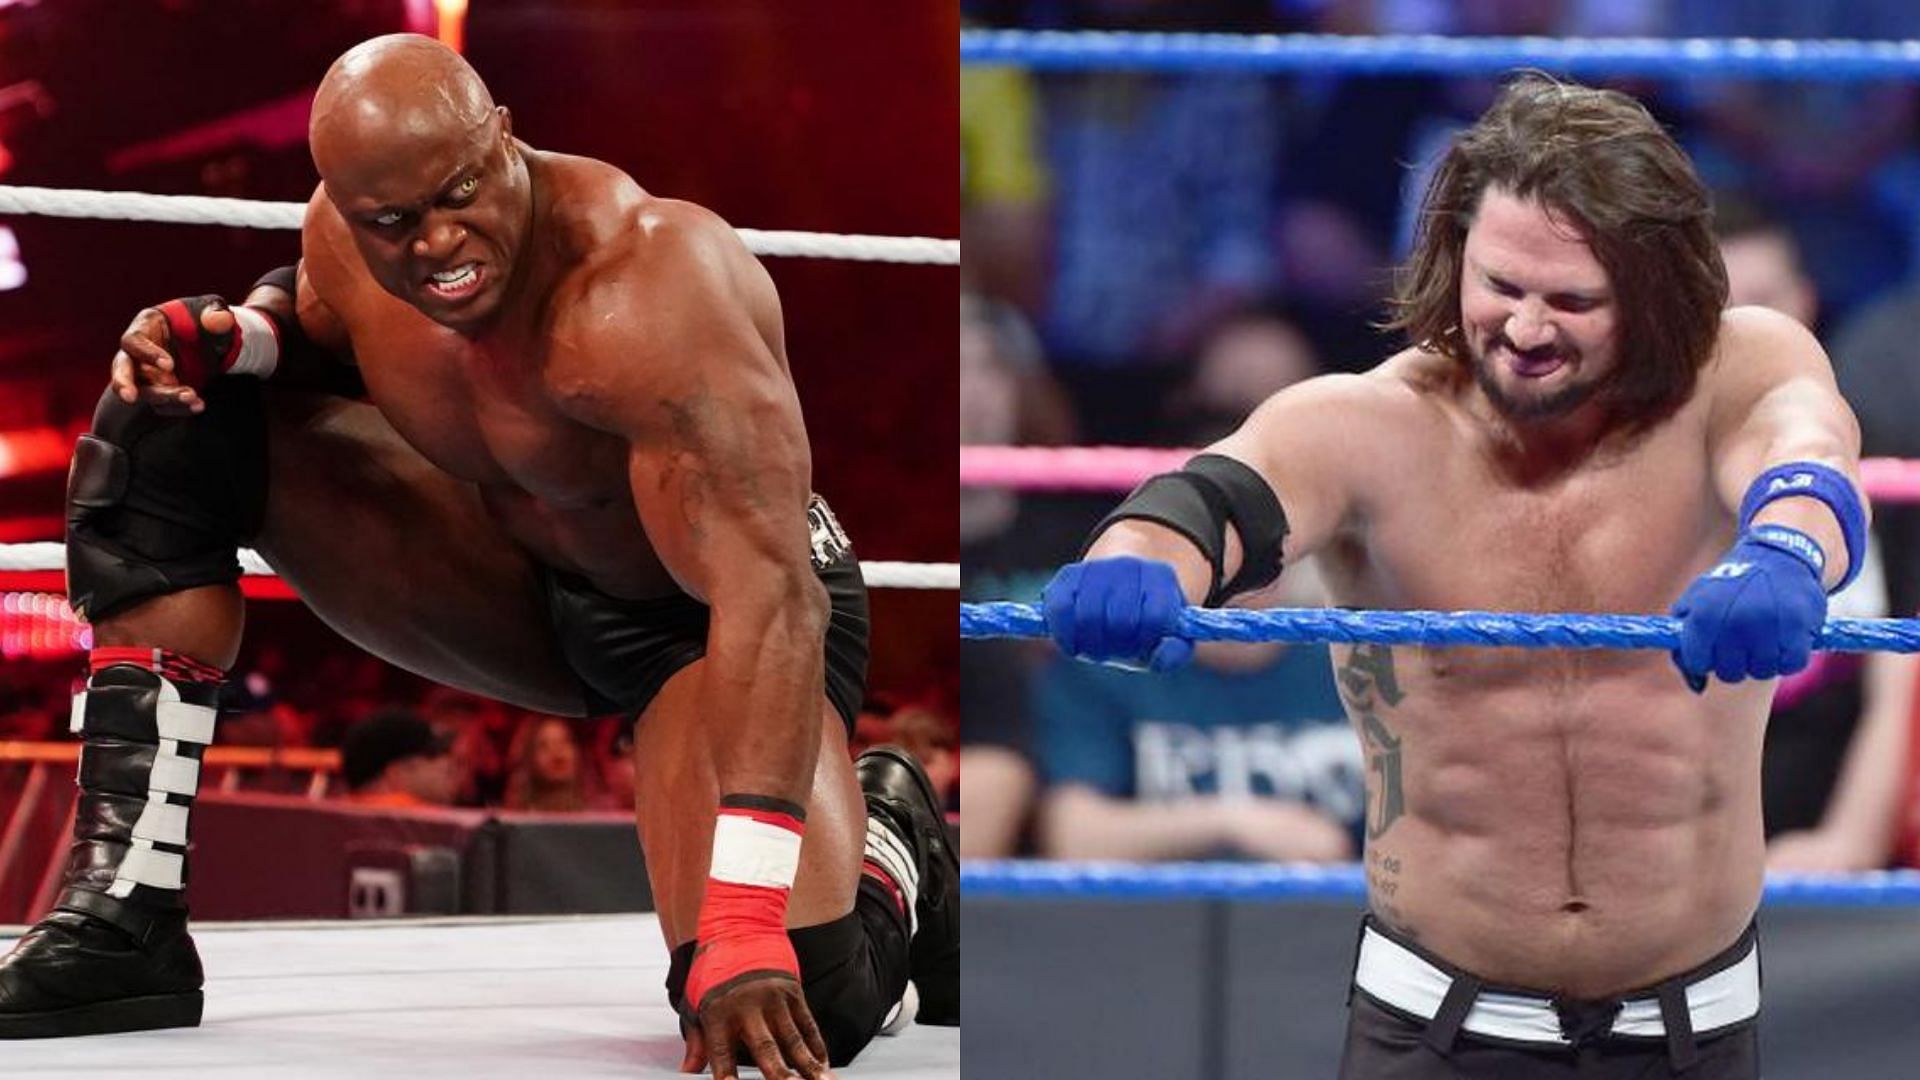 Will Bobby Lashley and AJ Styles be done with WWE in 2022?